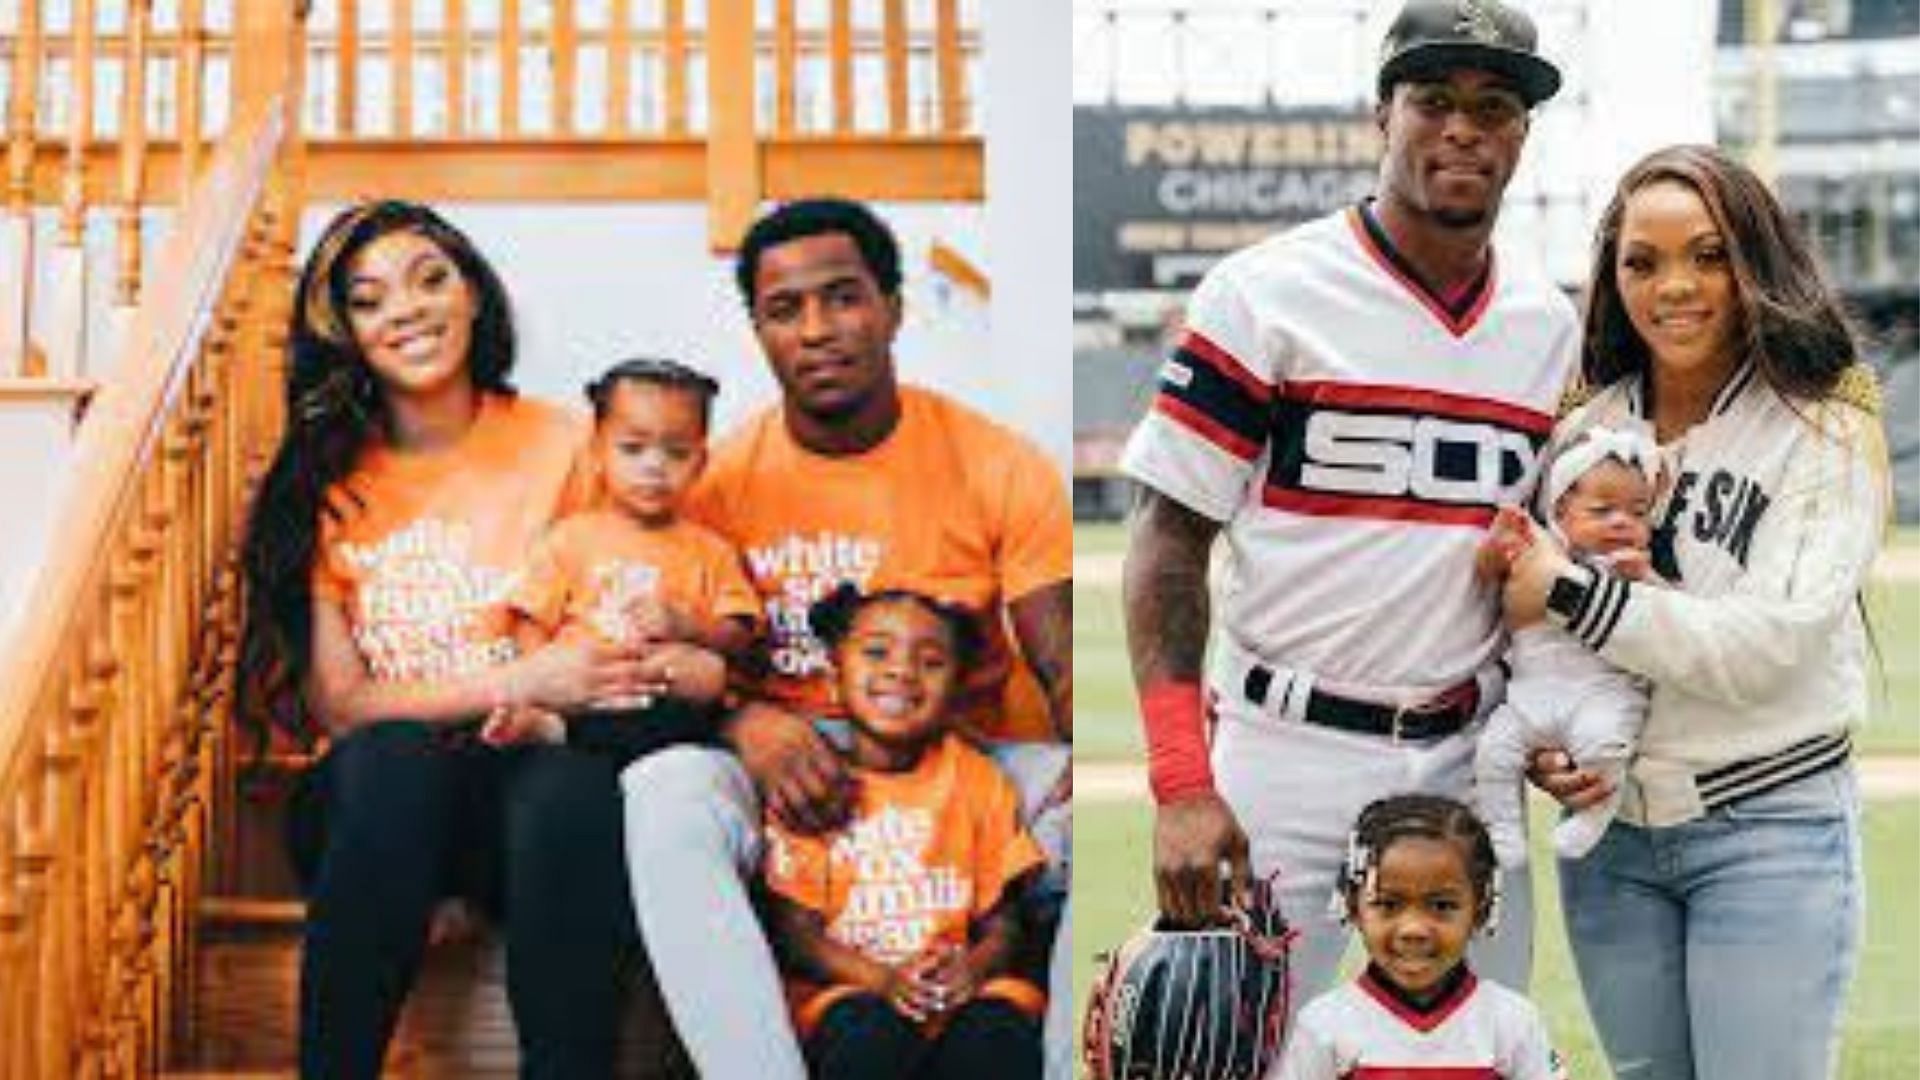 Tim Anderson and his wife Bria Anderson